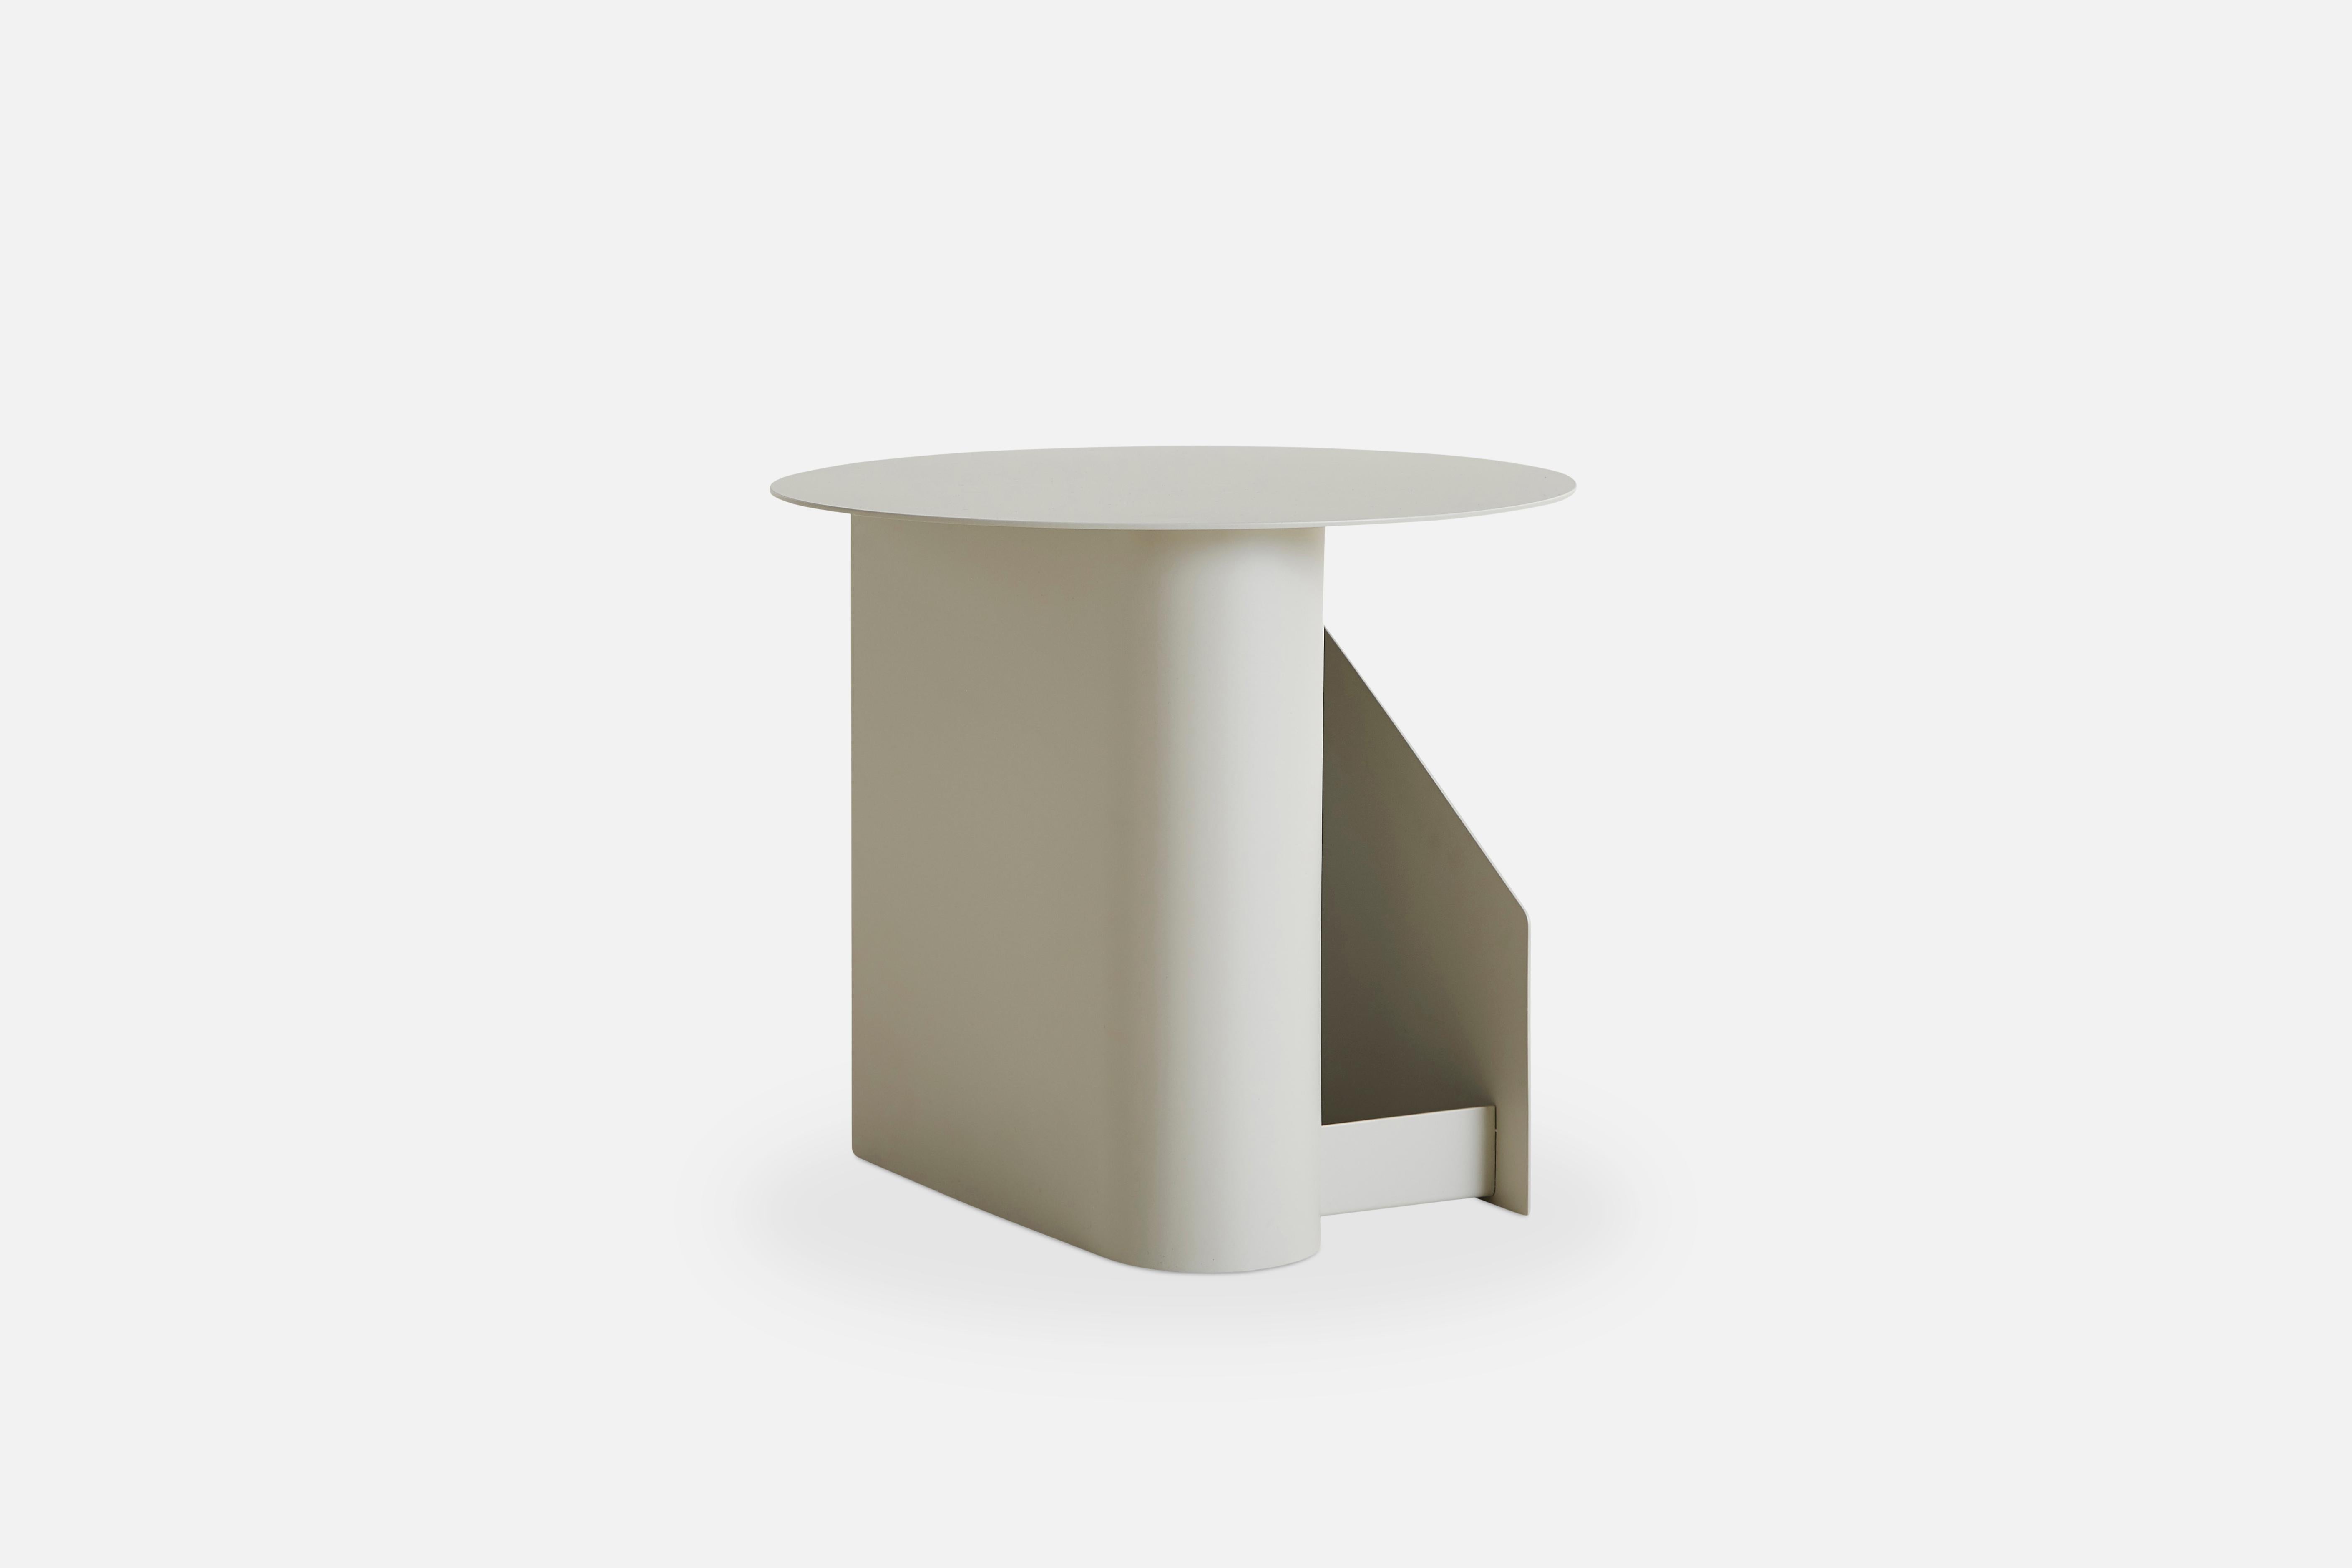 Warm Grey Sentrum side table by Schmahl +Schnippering
Materials: Metal
Dimensions: D 40 x W 40 x H 36 cm
Also available in different colours. 

The founders, Mia and Torben Koed, decided to put their 30 years of experience into a new project.